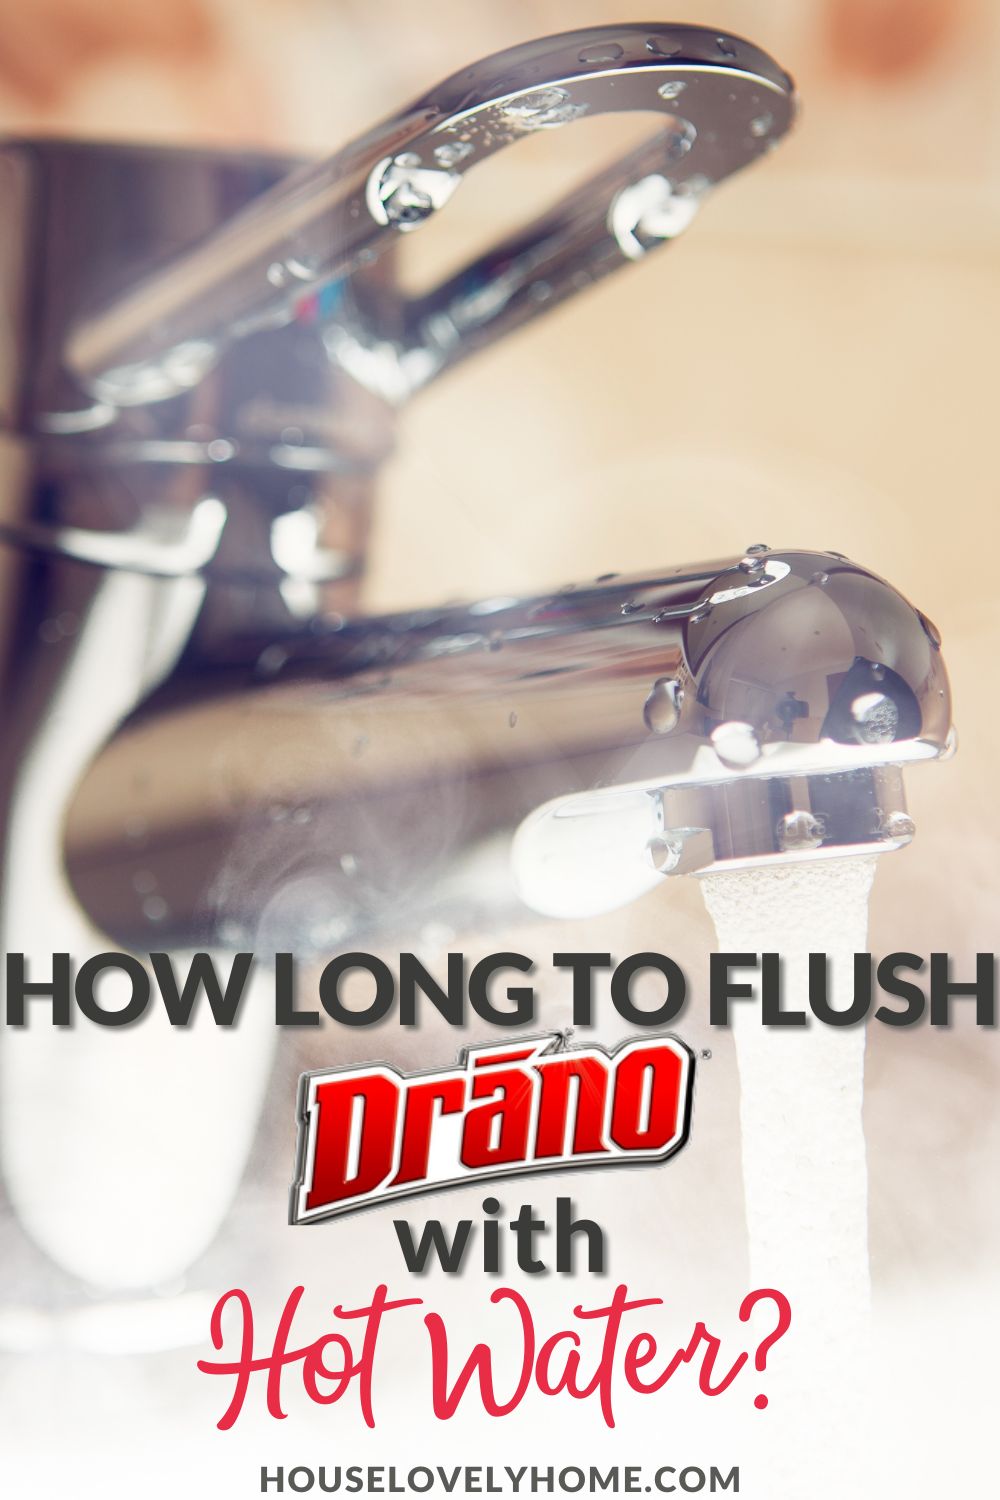 Image showing water running from faucet, surrounded with steam and text overlay that reads How Long to Flush Drano With Hot Water?